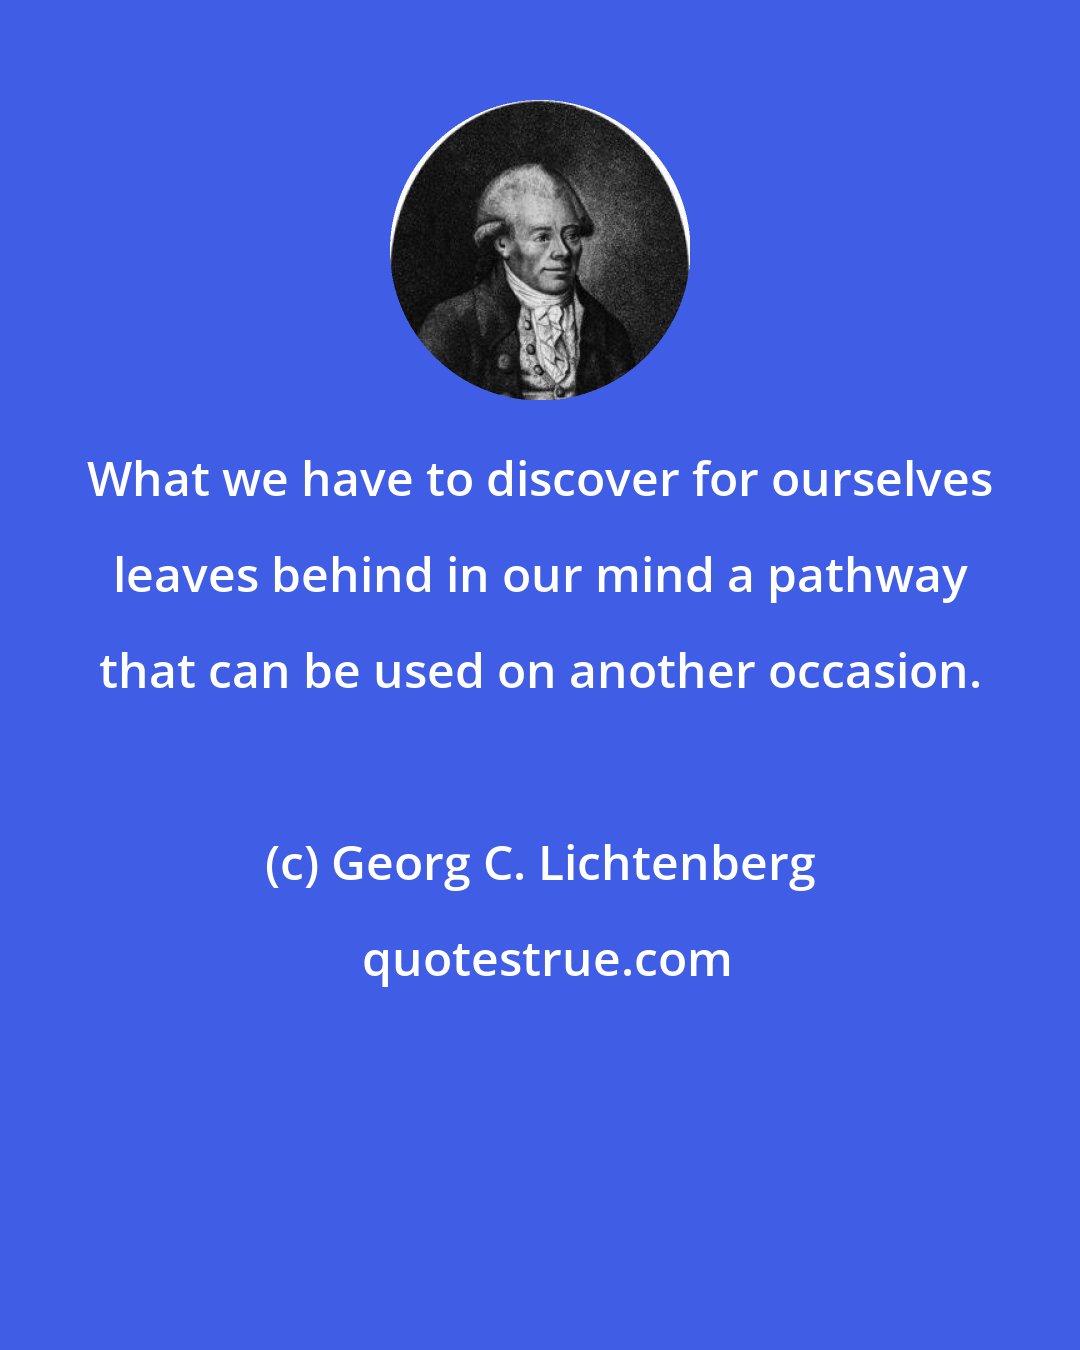 Georg C. Lichtenberg: What we have to discover for ourselves leaves behind in our mind a pathway that can be used on another occasion.